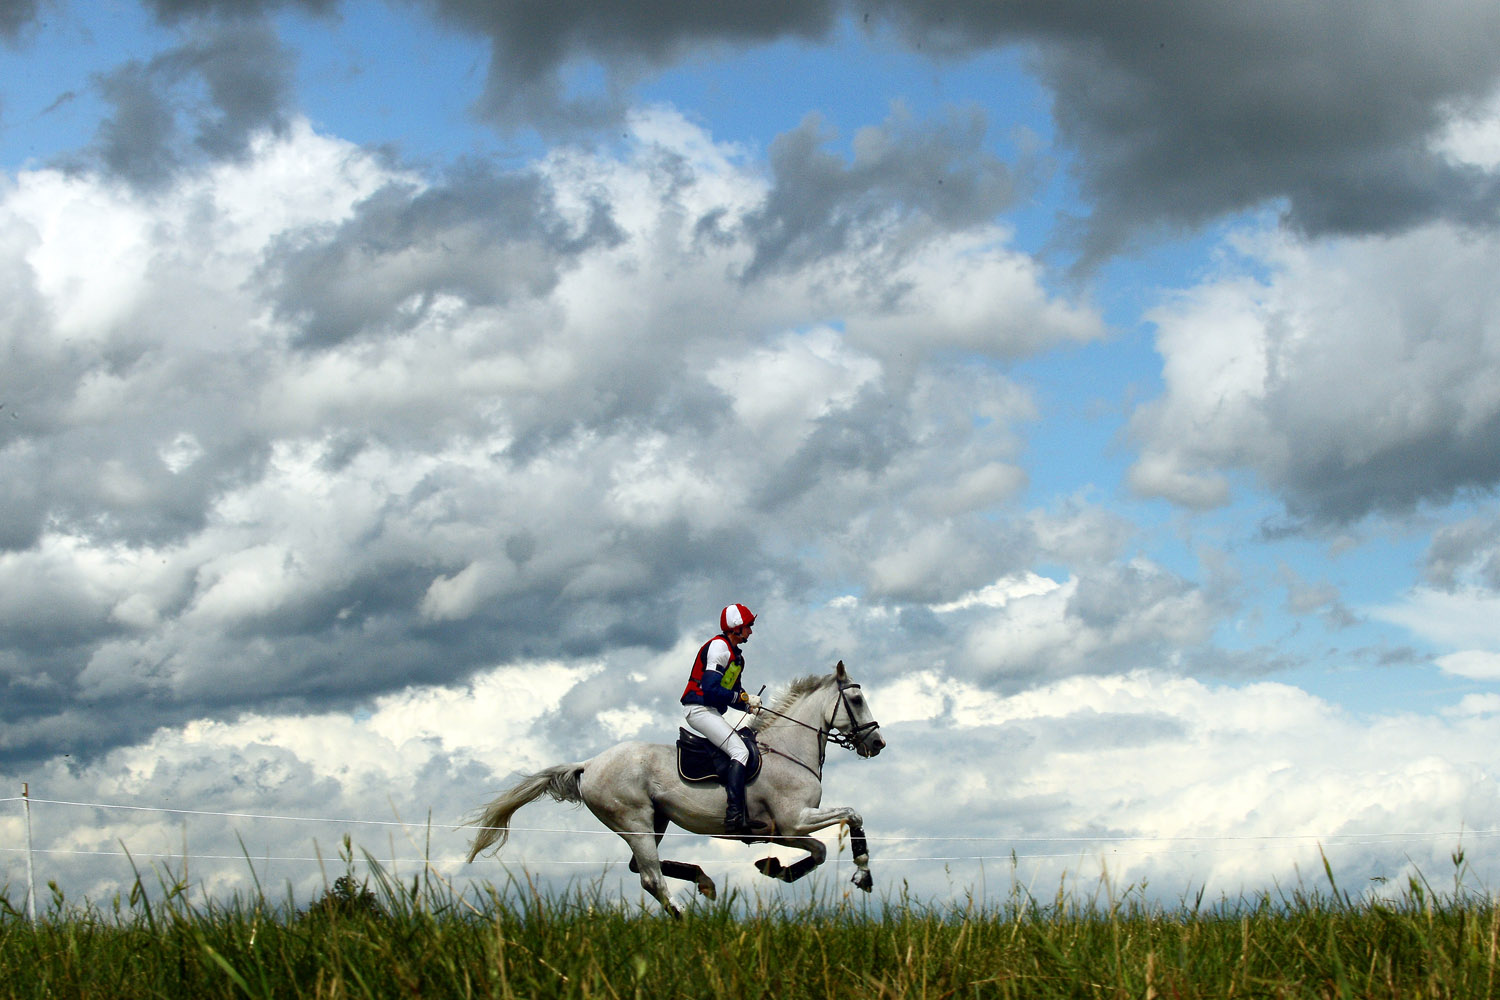 July 13, 2012. An equestrian rides his horse during an eventing competition in Baborowko, Poland.